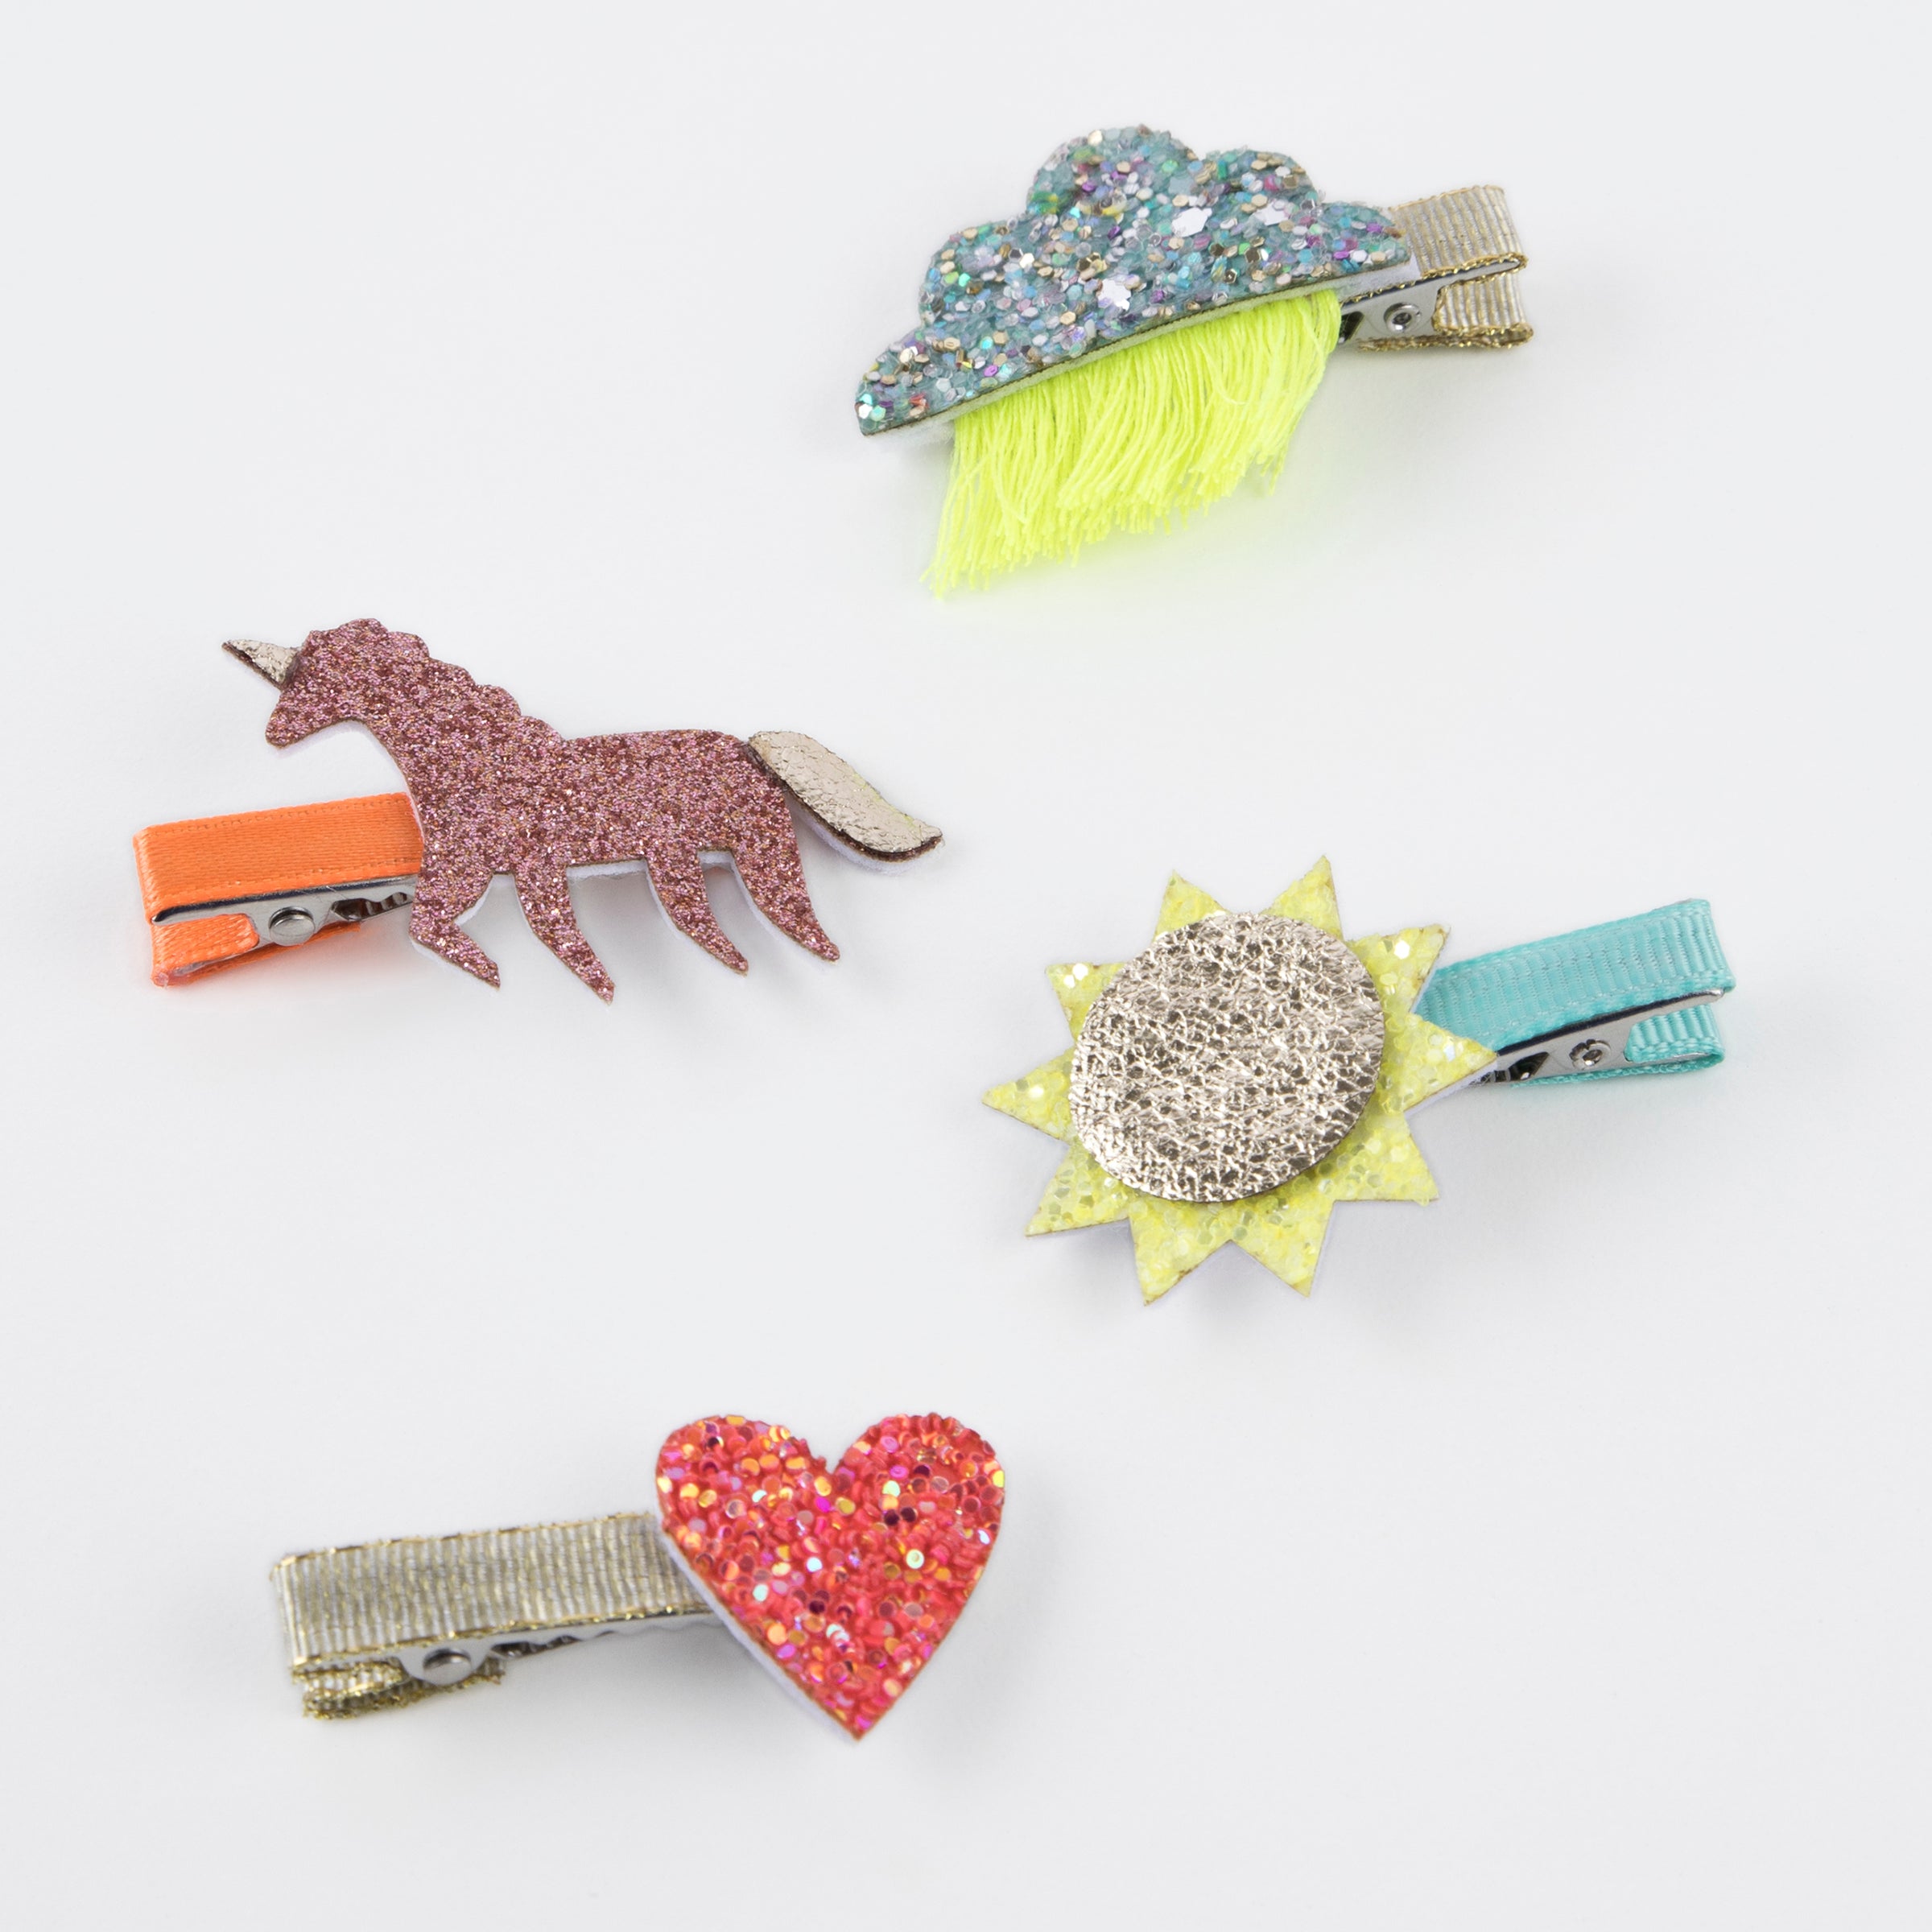 Our hair clips for kids are made with glitter fabric and leatherette for party hair styles.